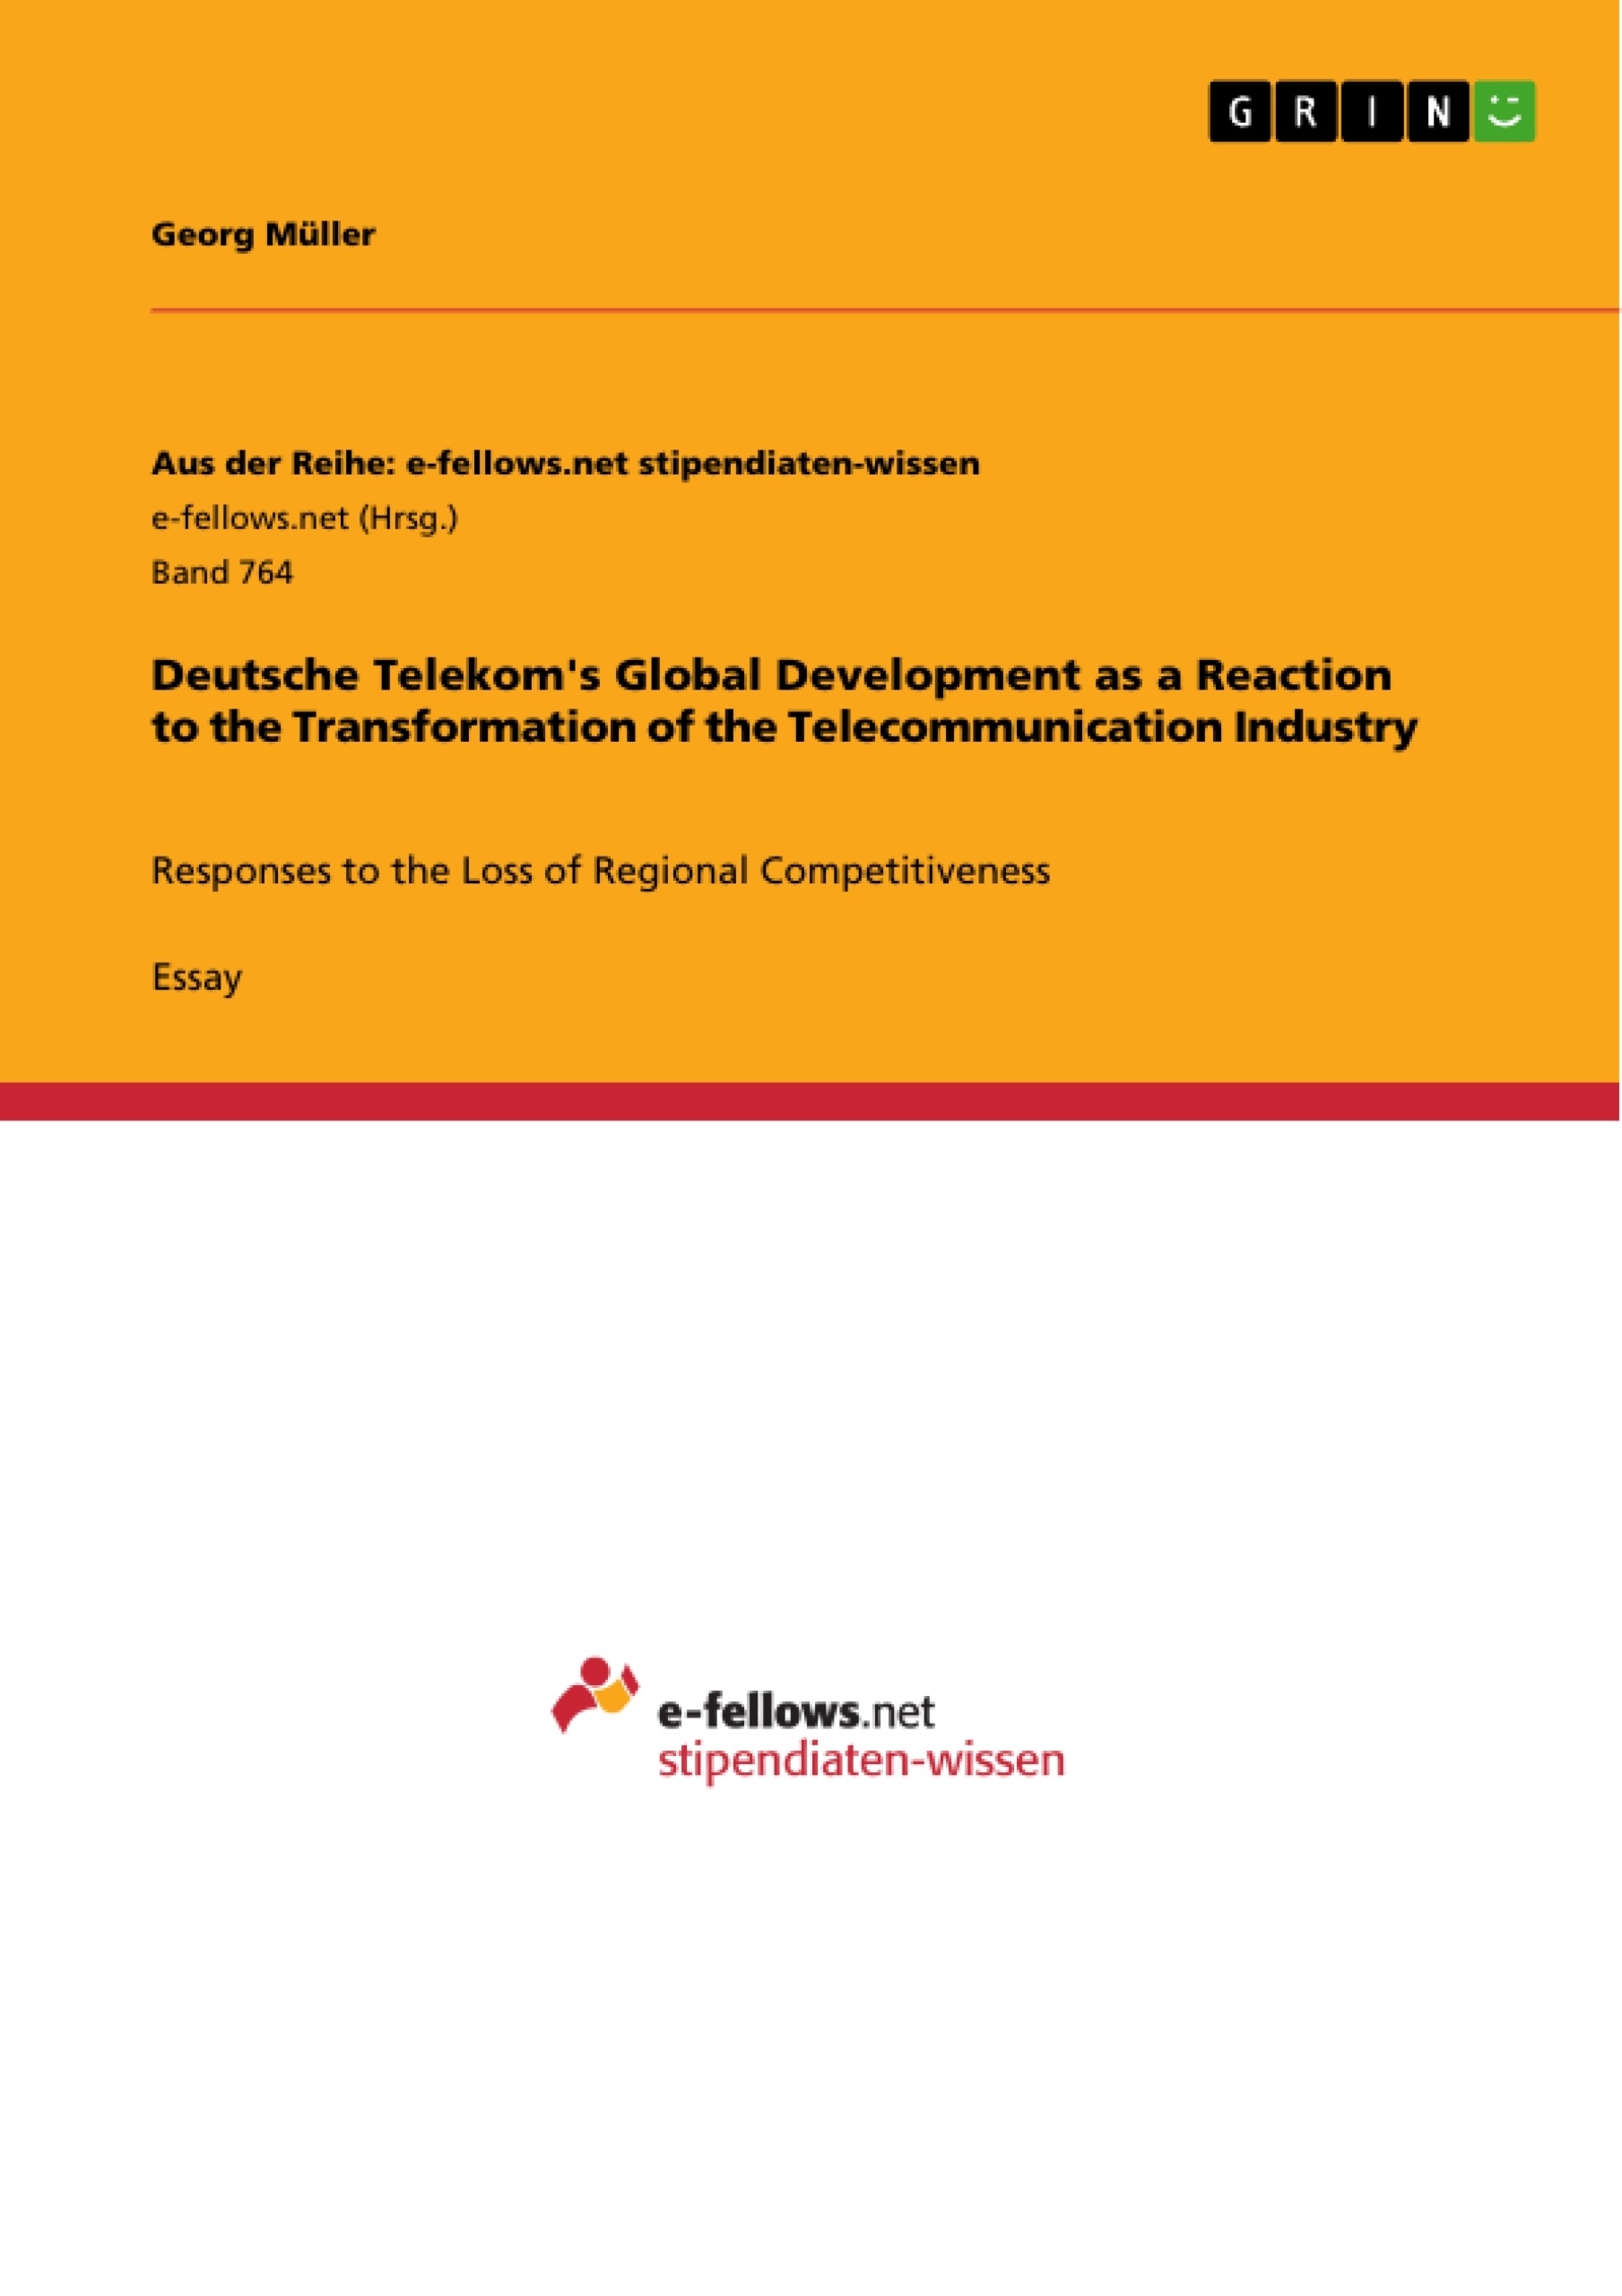 Title: Deutsche Telekom's Global Development as a Reaction to the Transformation of the Telecommunication Industry